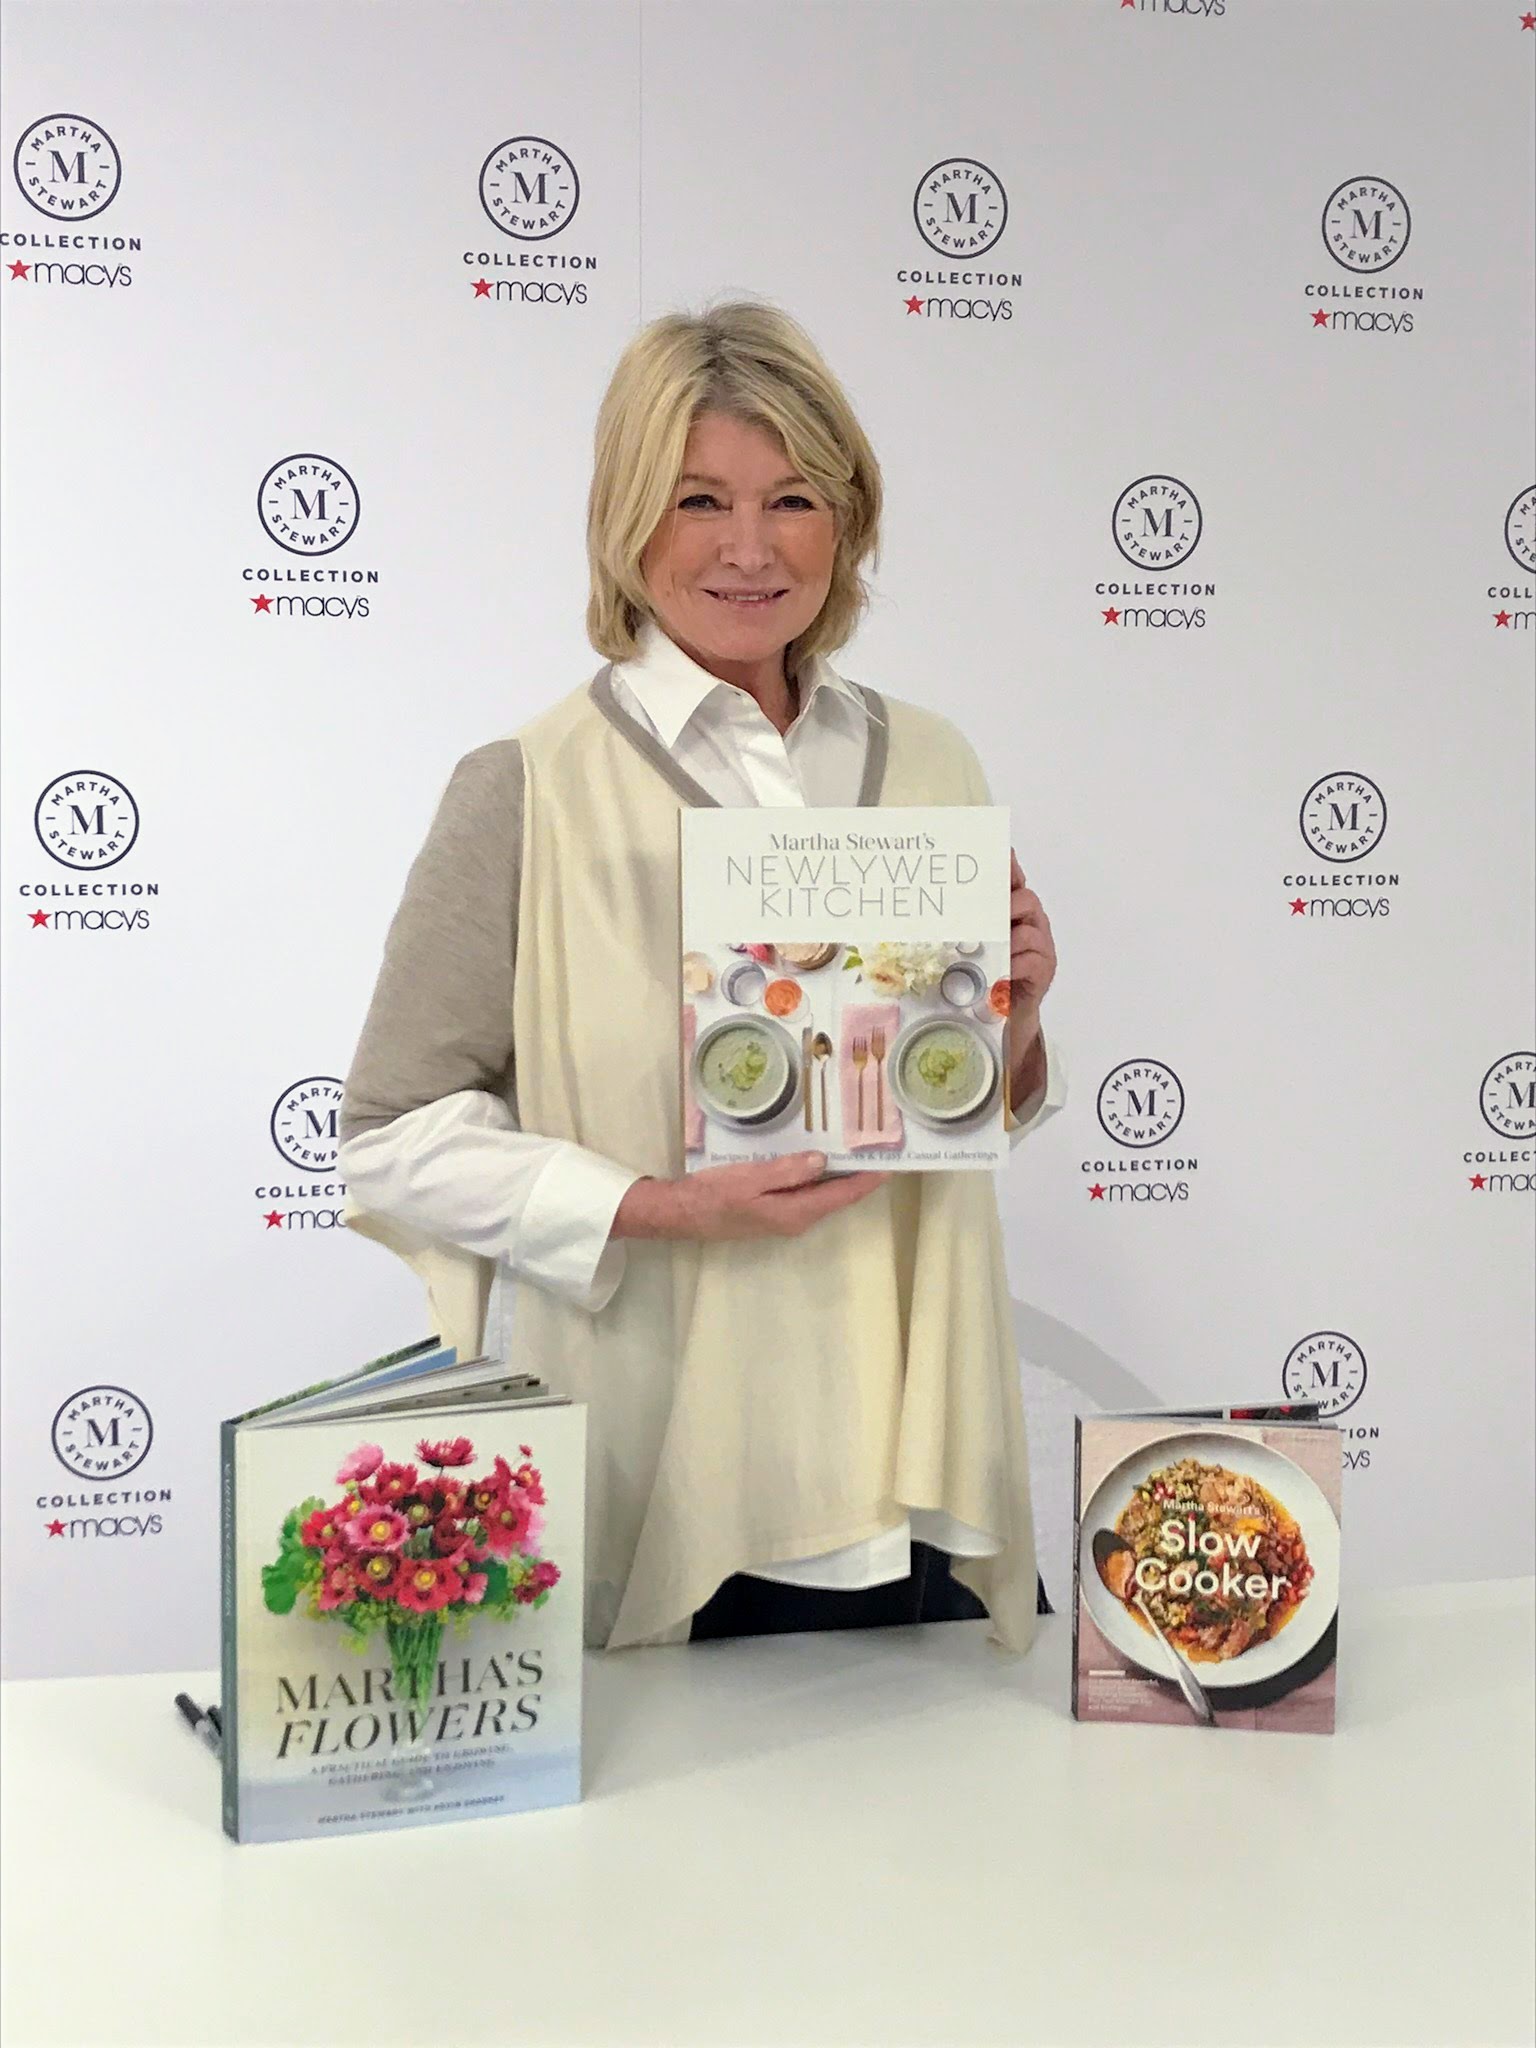 The Martha Stewart Blog Blog Archive A Book Signing At Macy S